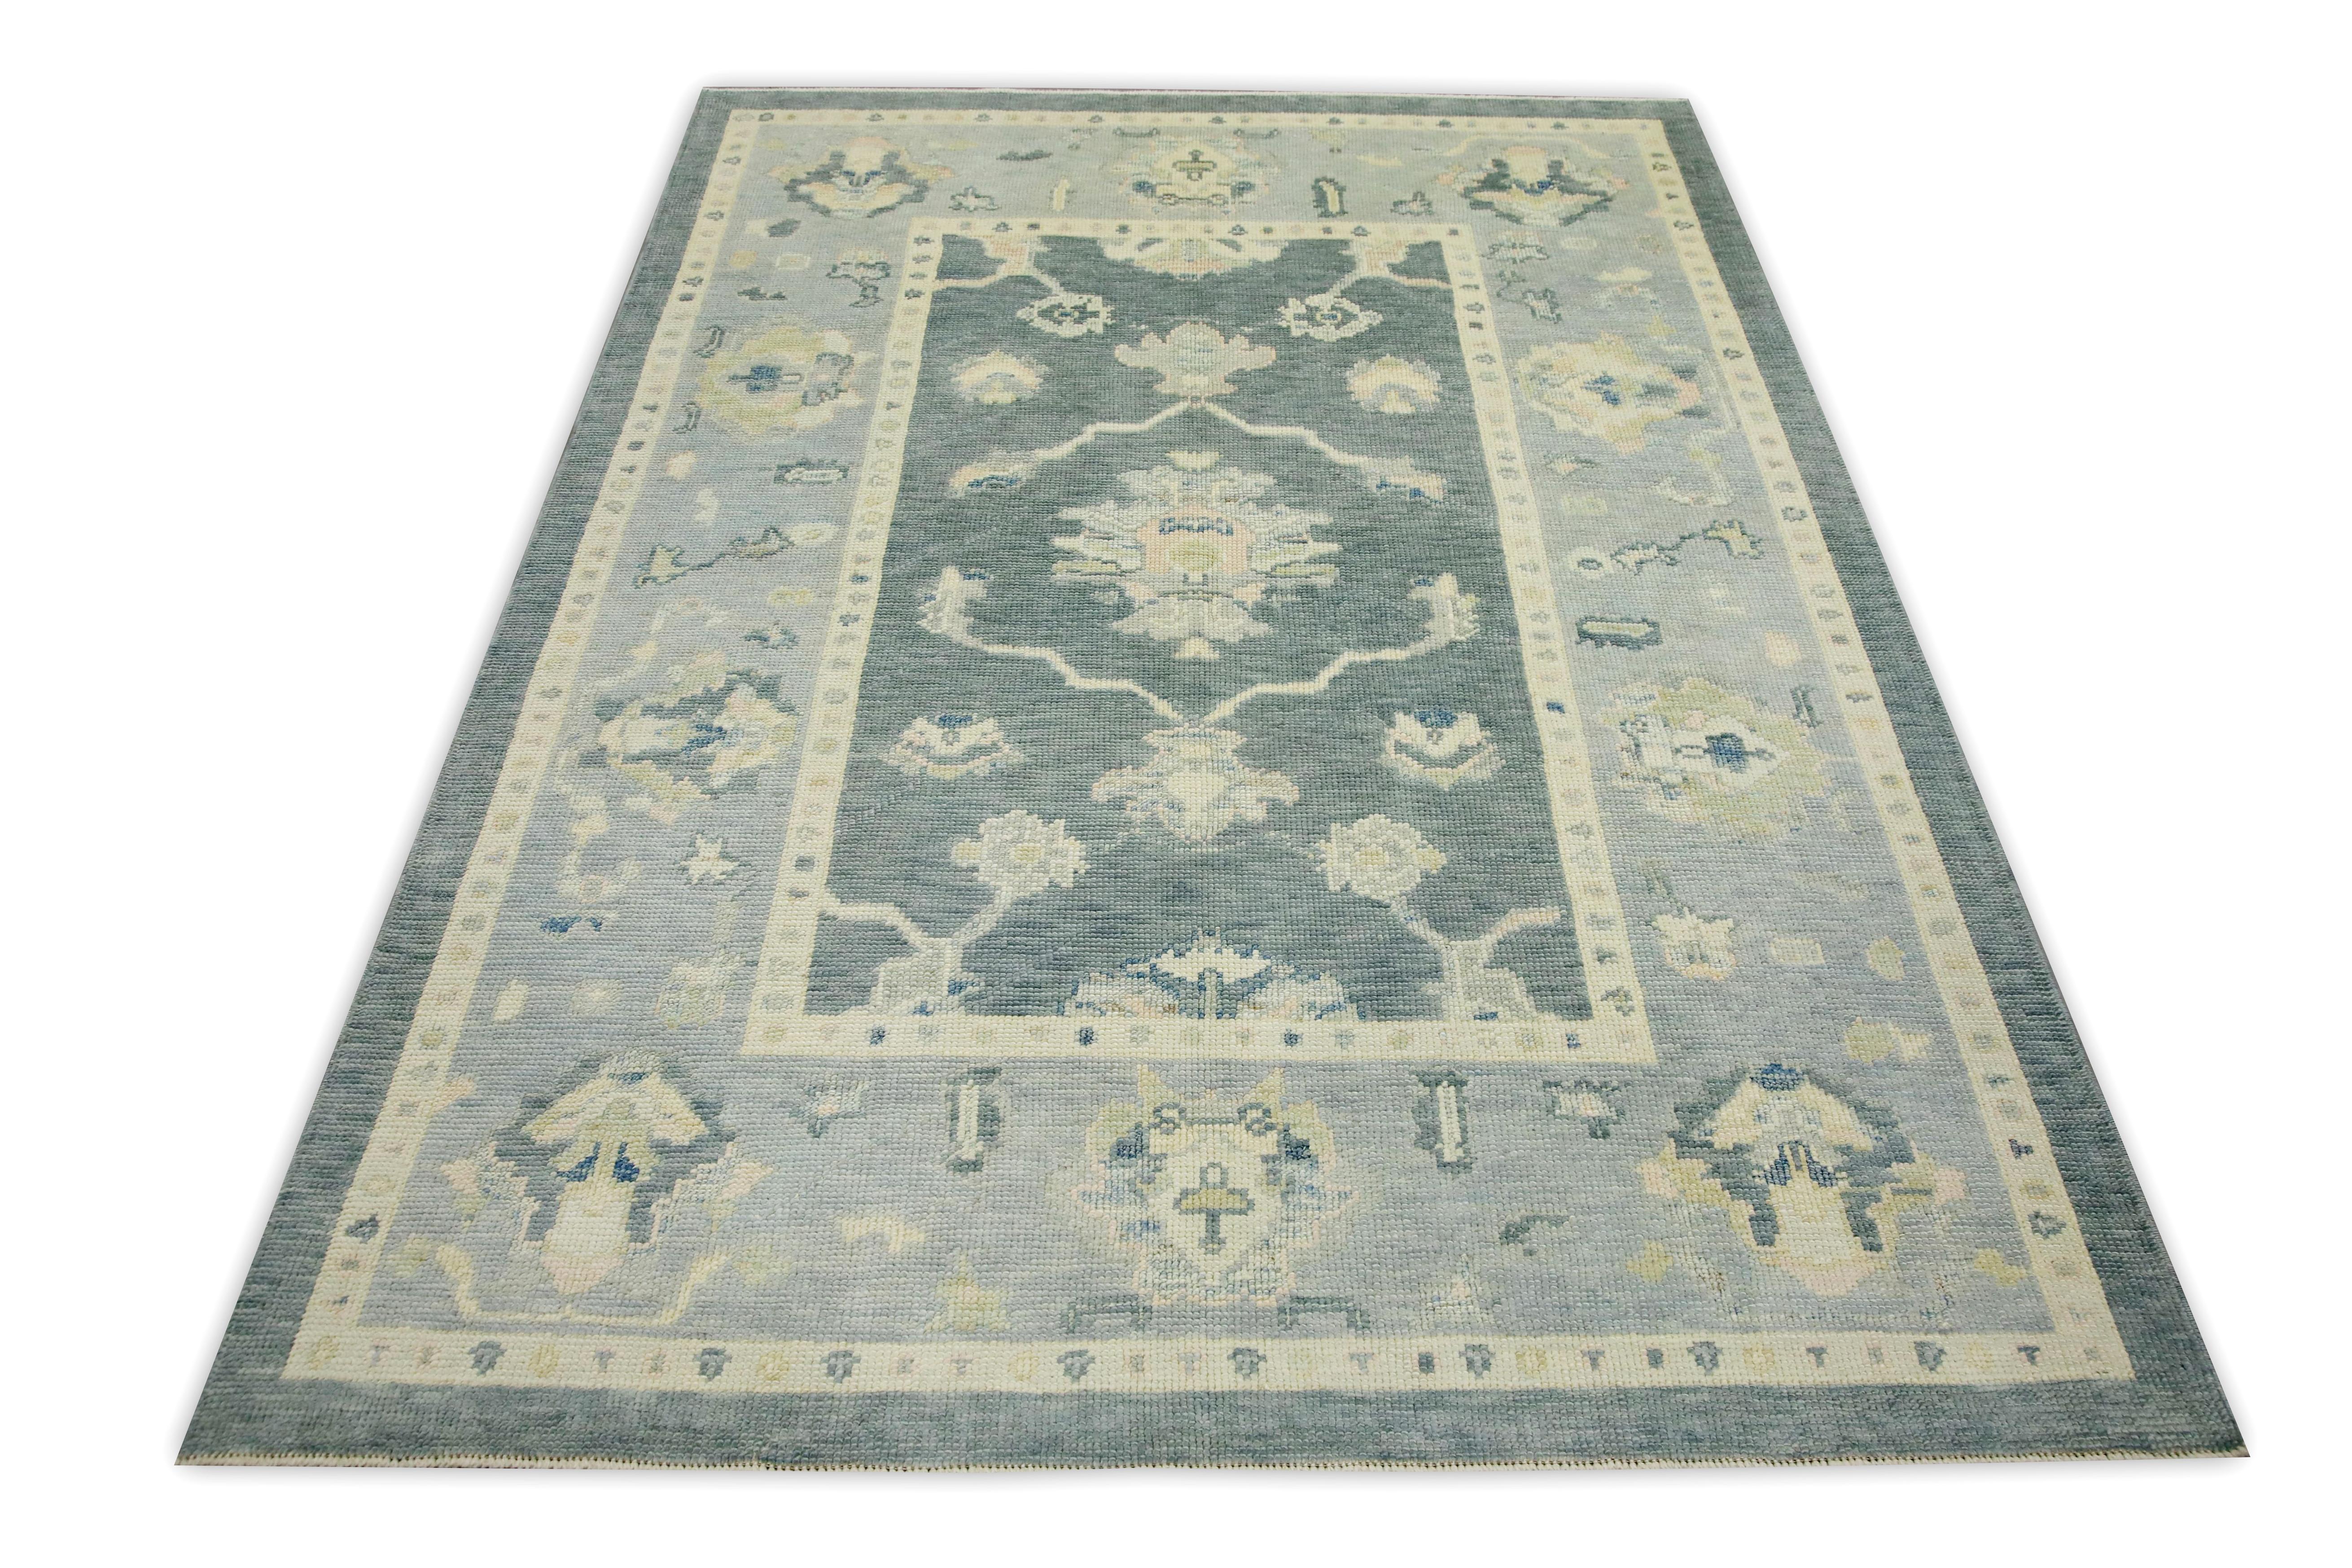 Contemporary Teal Floral Design Handwoven Wool Turkish Oushak Rug 5'1